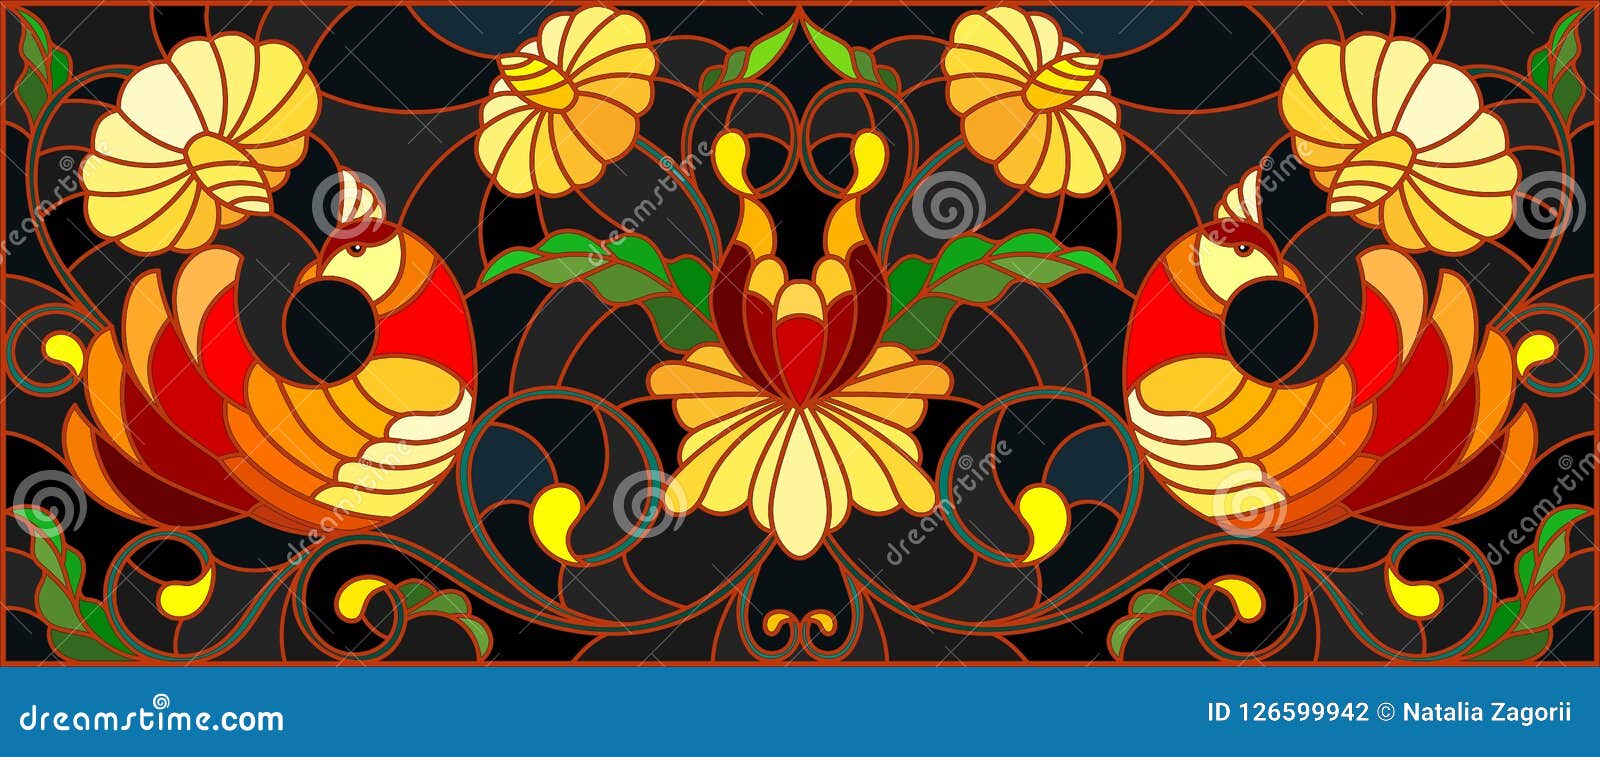 Stained Glass Illustration with a Pair of Birds , Flowers and ...